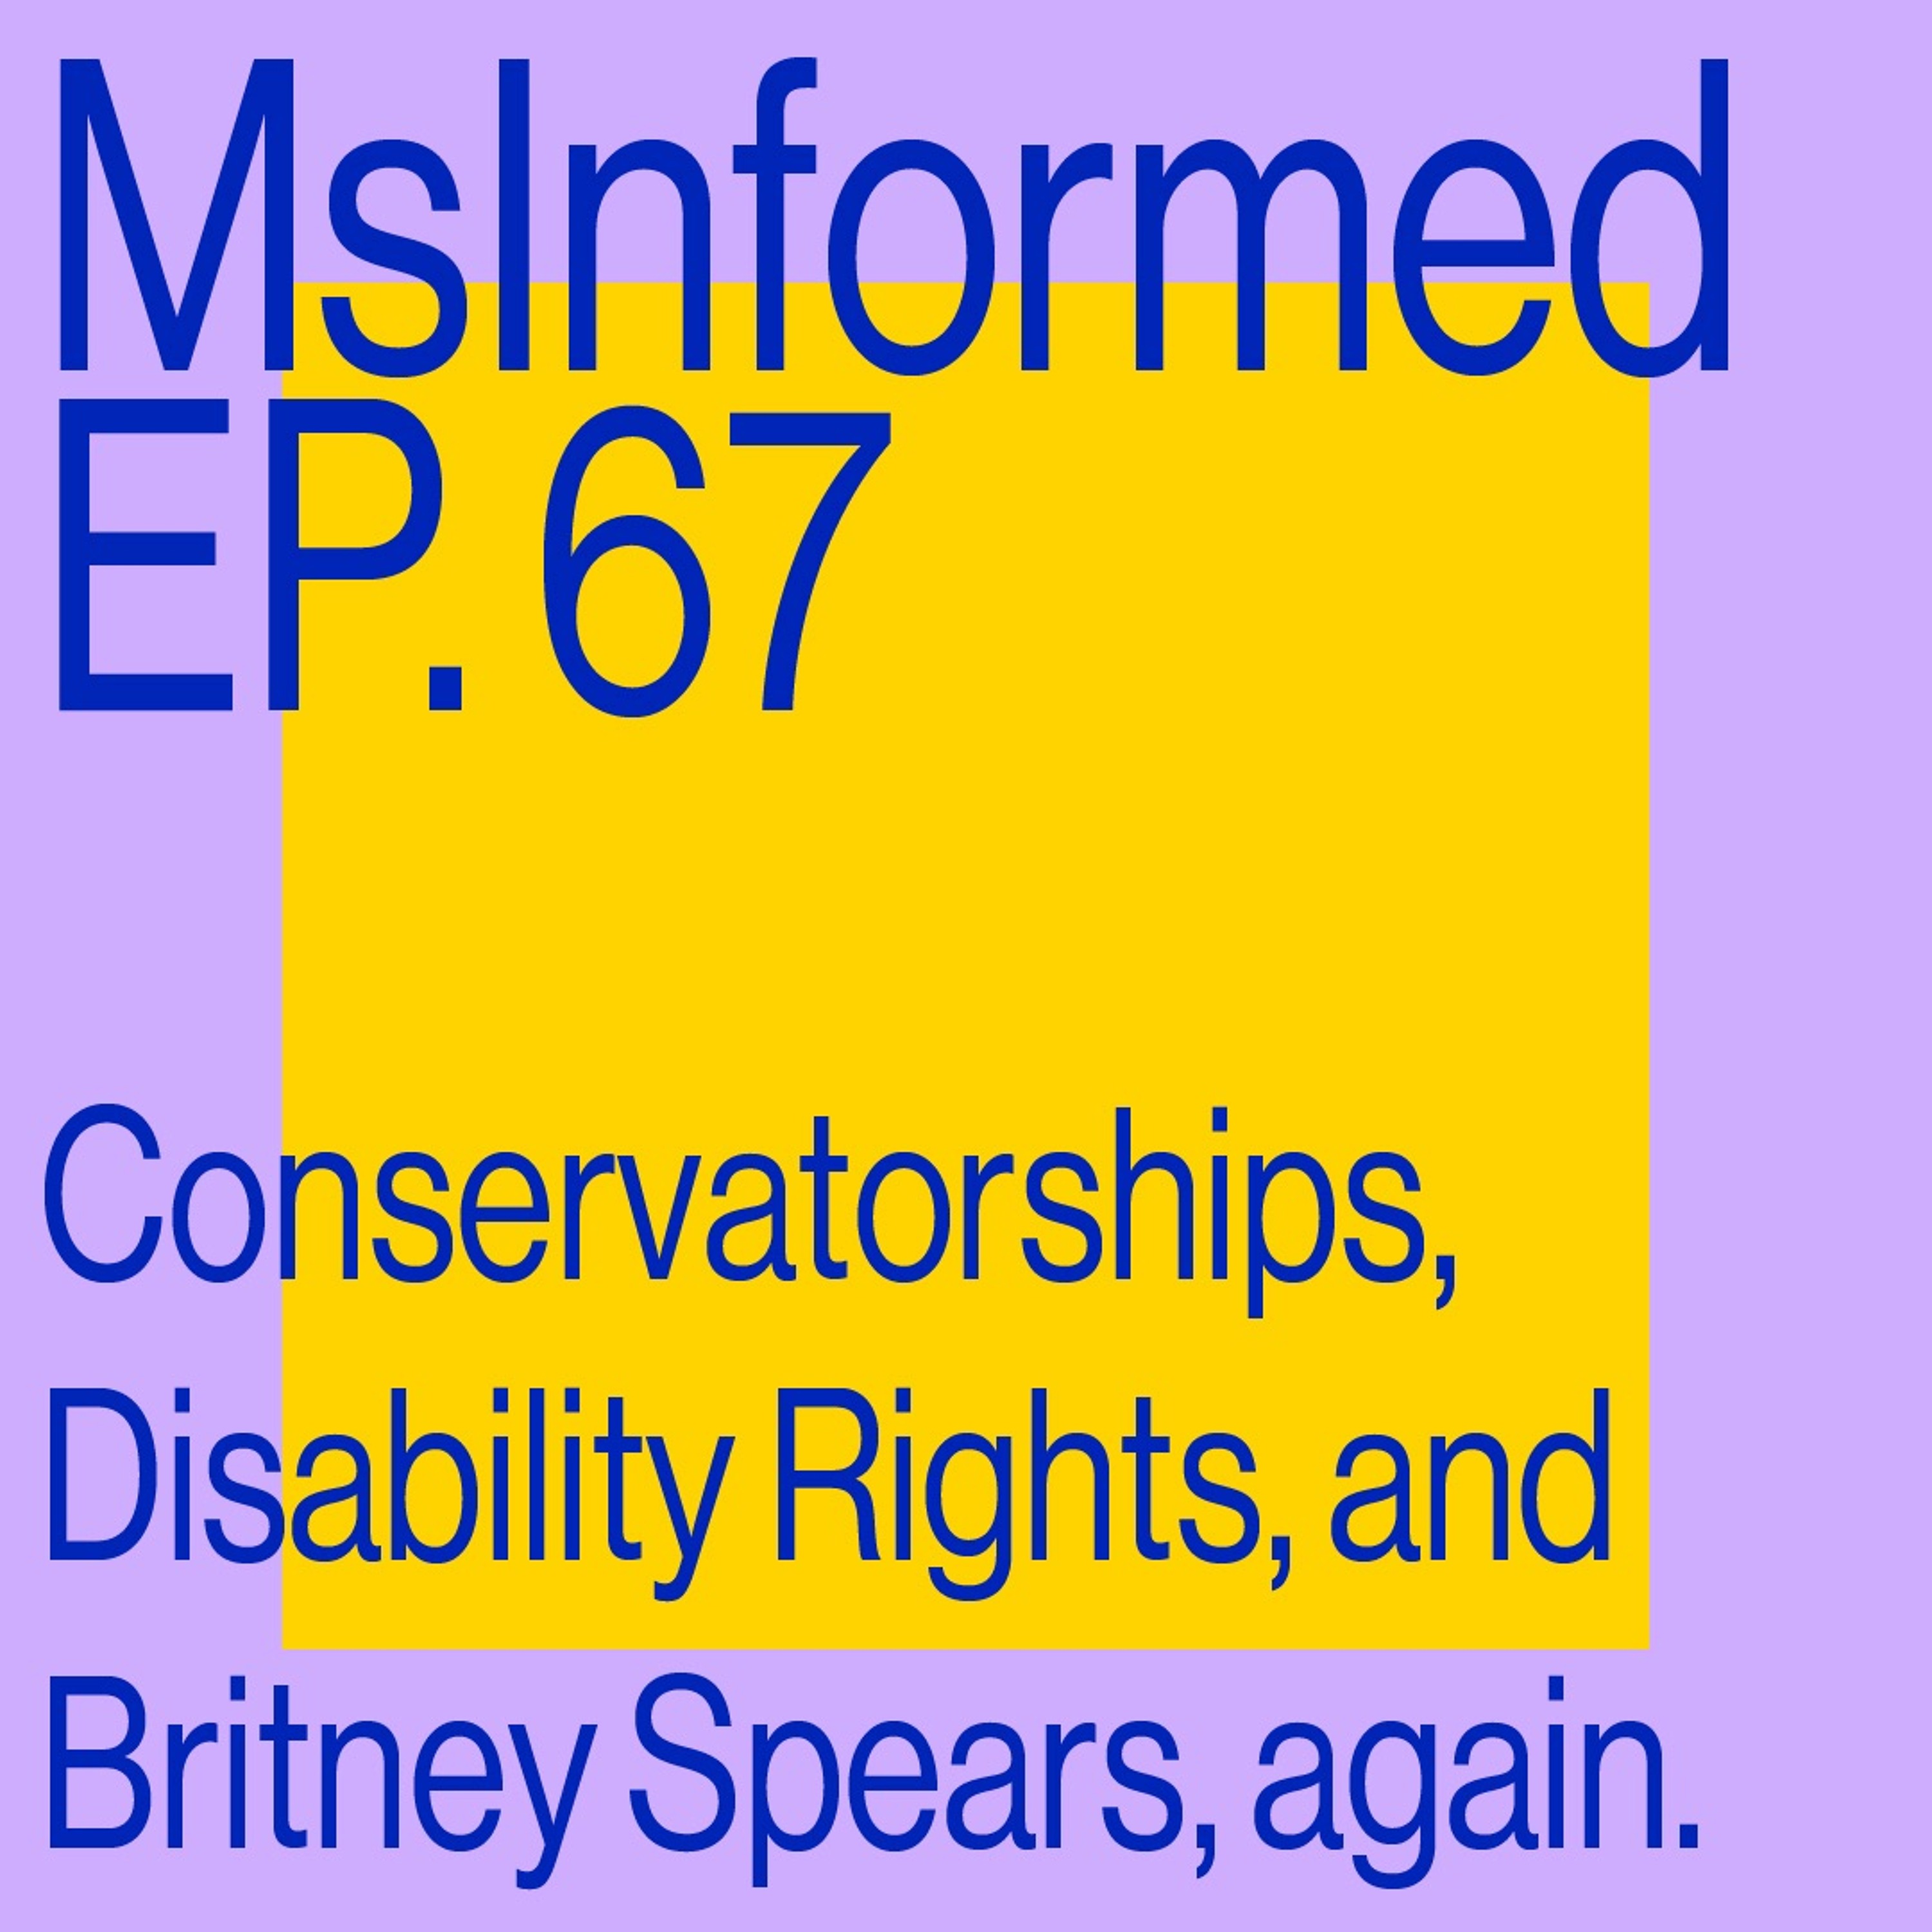 Episode 67: Conservatorships, Disability Rights, and Britney Spears, again